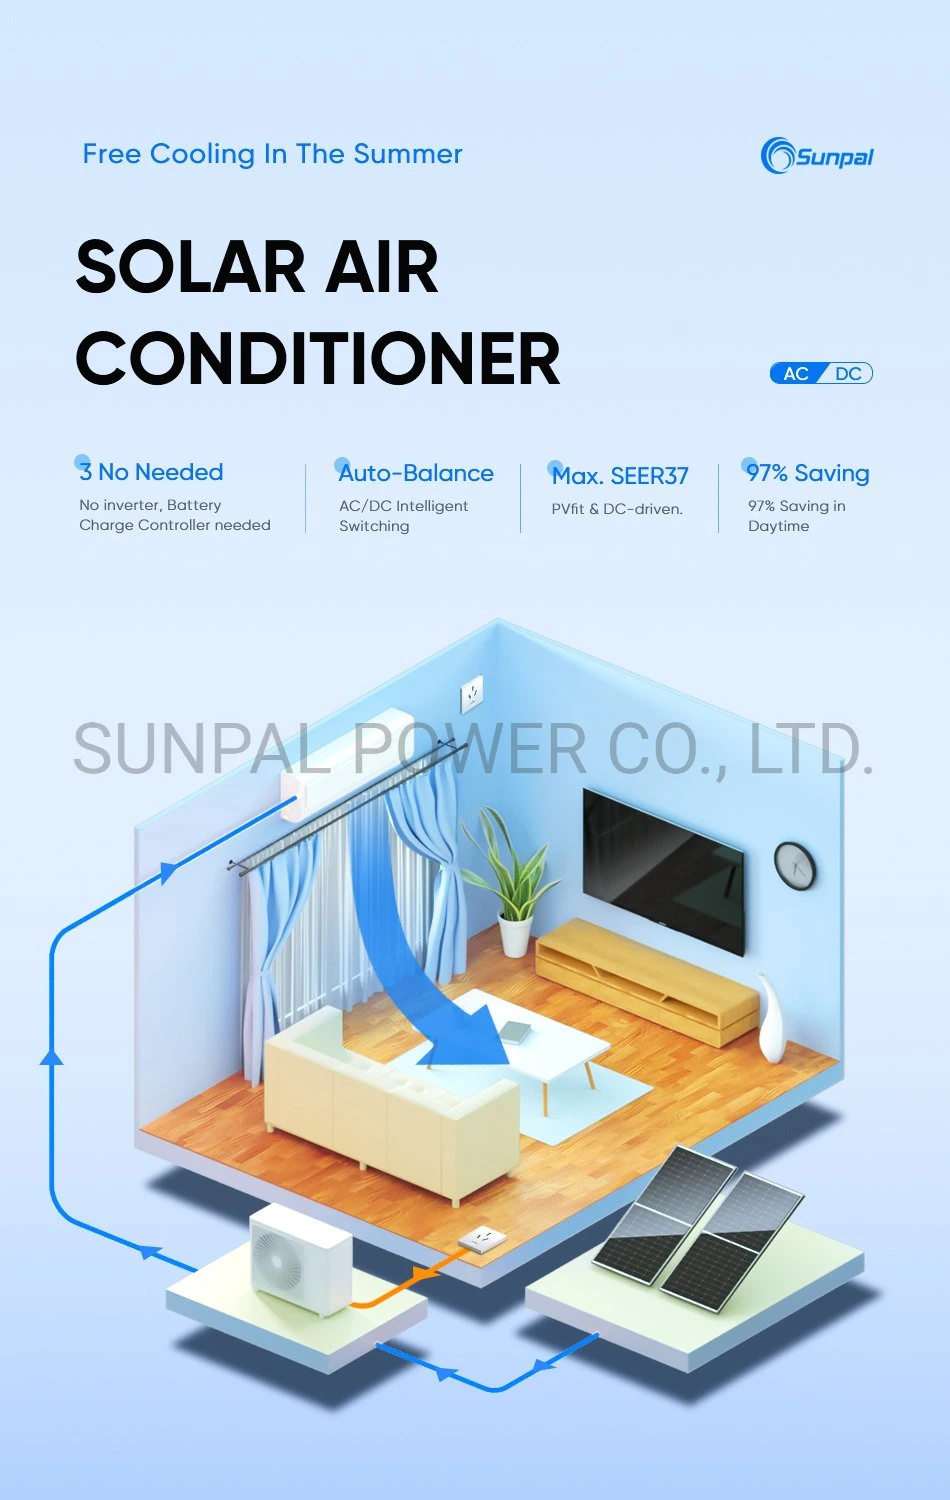 Wholesale Mini Split Inverter System Heating And Cooling Air Conditioners Solar Powered 20 To 26 SEER T3 Climate For Home Room